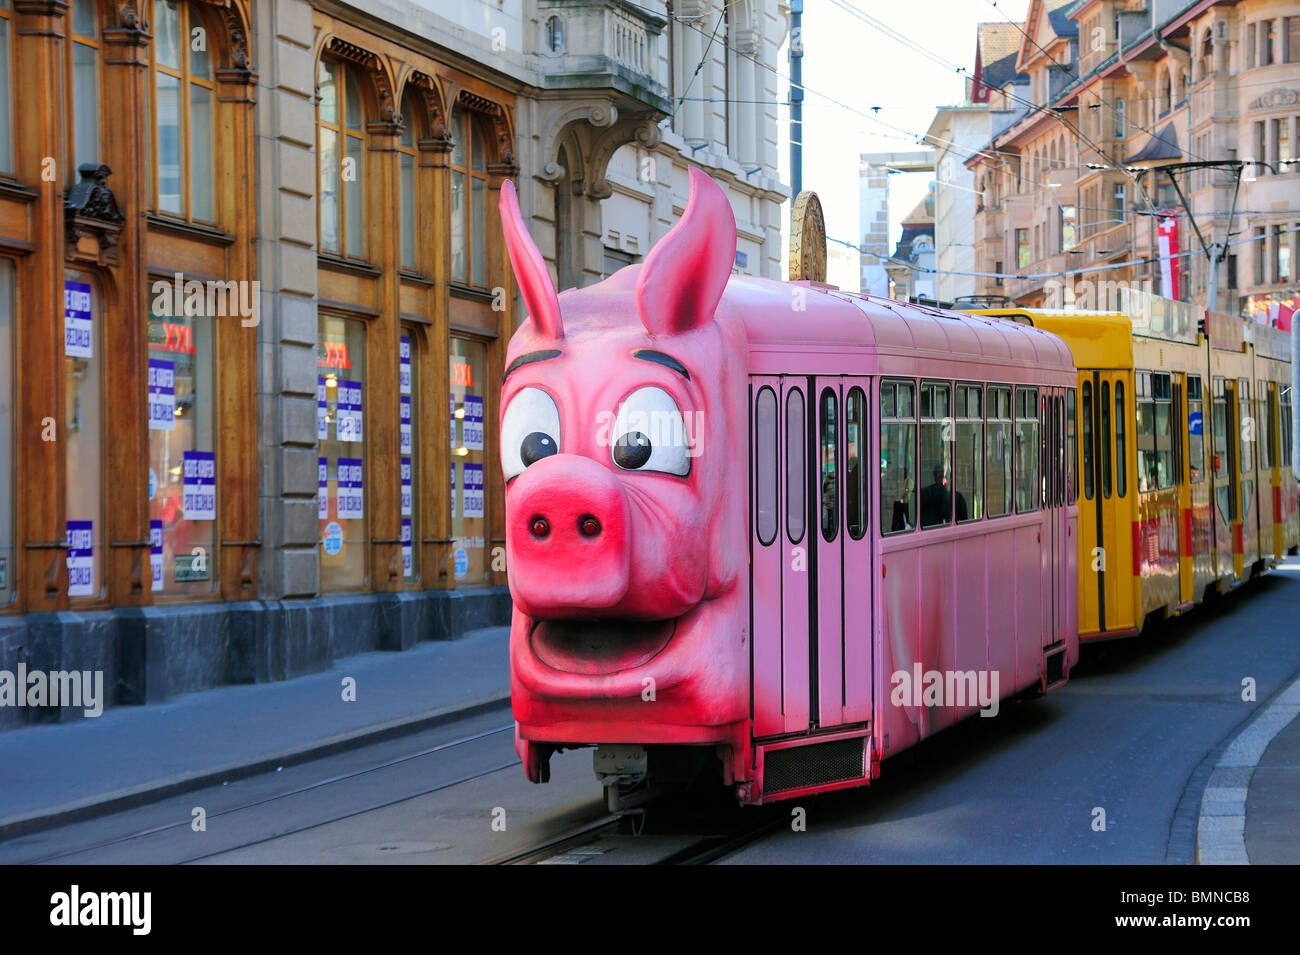 Swiss humour - a pig-shaped tram in Basel (Bale), Switzerland Stock Photo